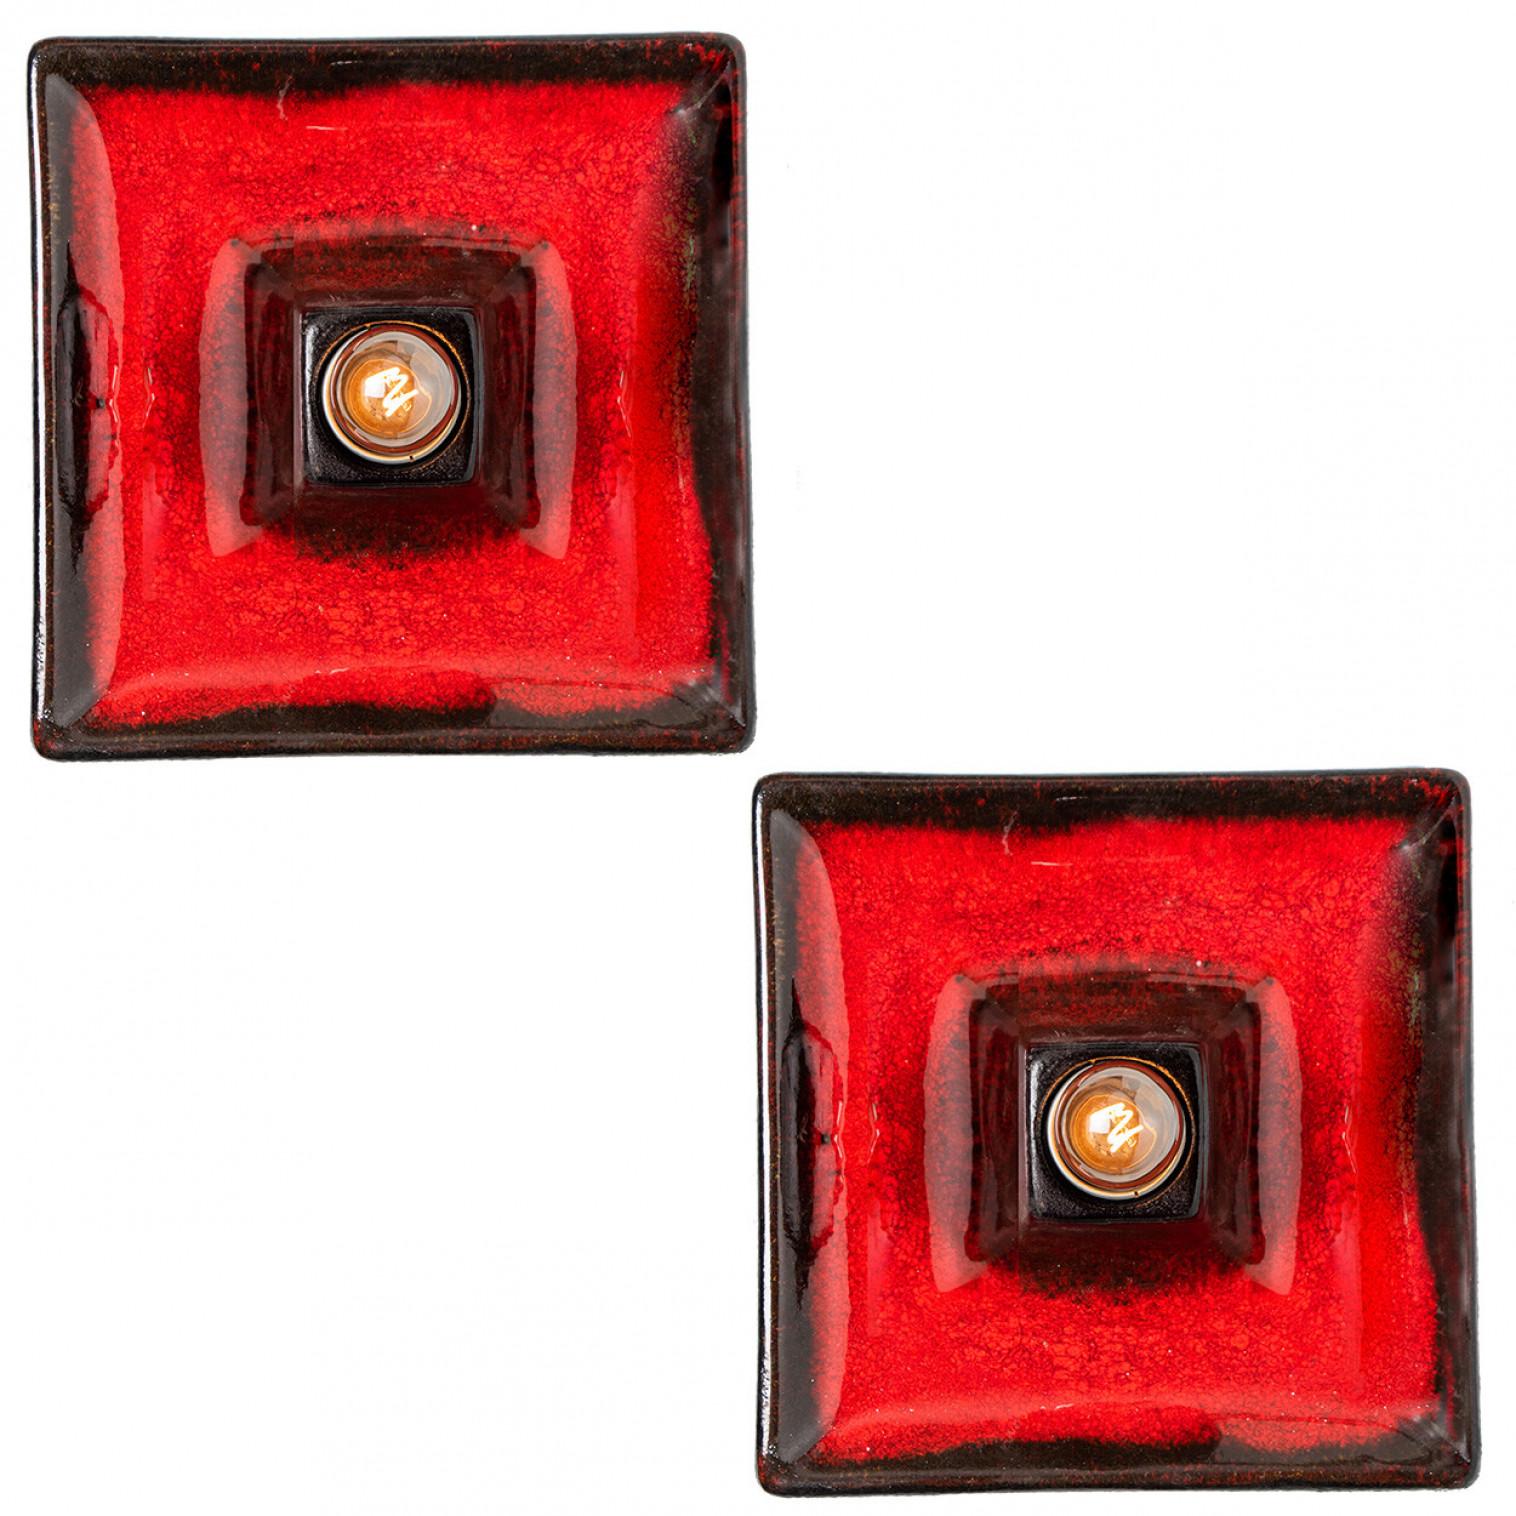 Several Red Toned Mixed Wall Lights in Glazed Ceramic Style, 1970 For Sale 12